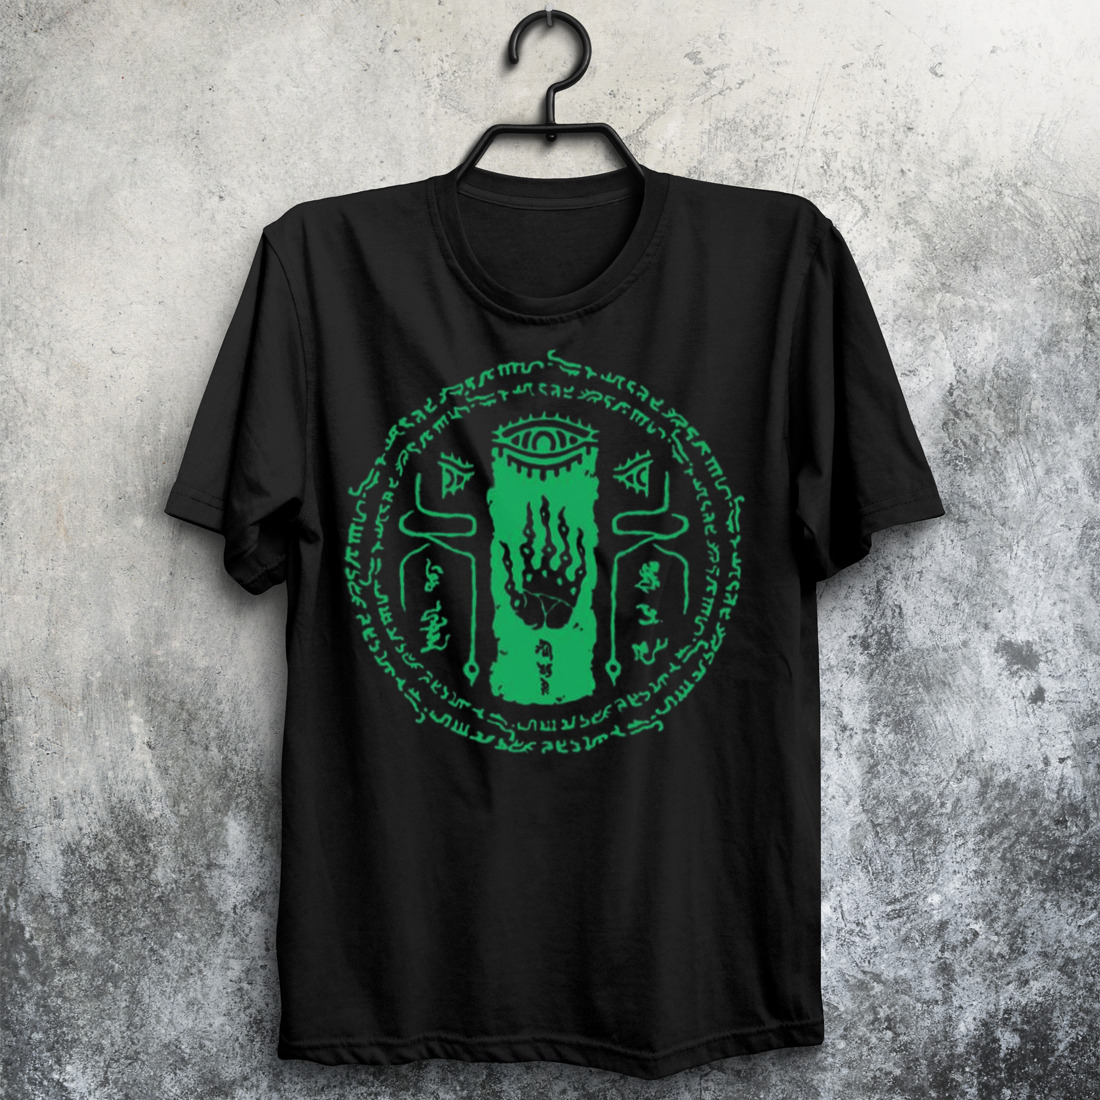 Withered Hand Tears Of The Kingdom shirt